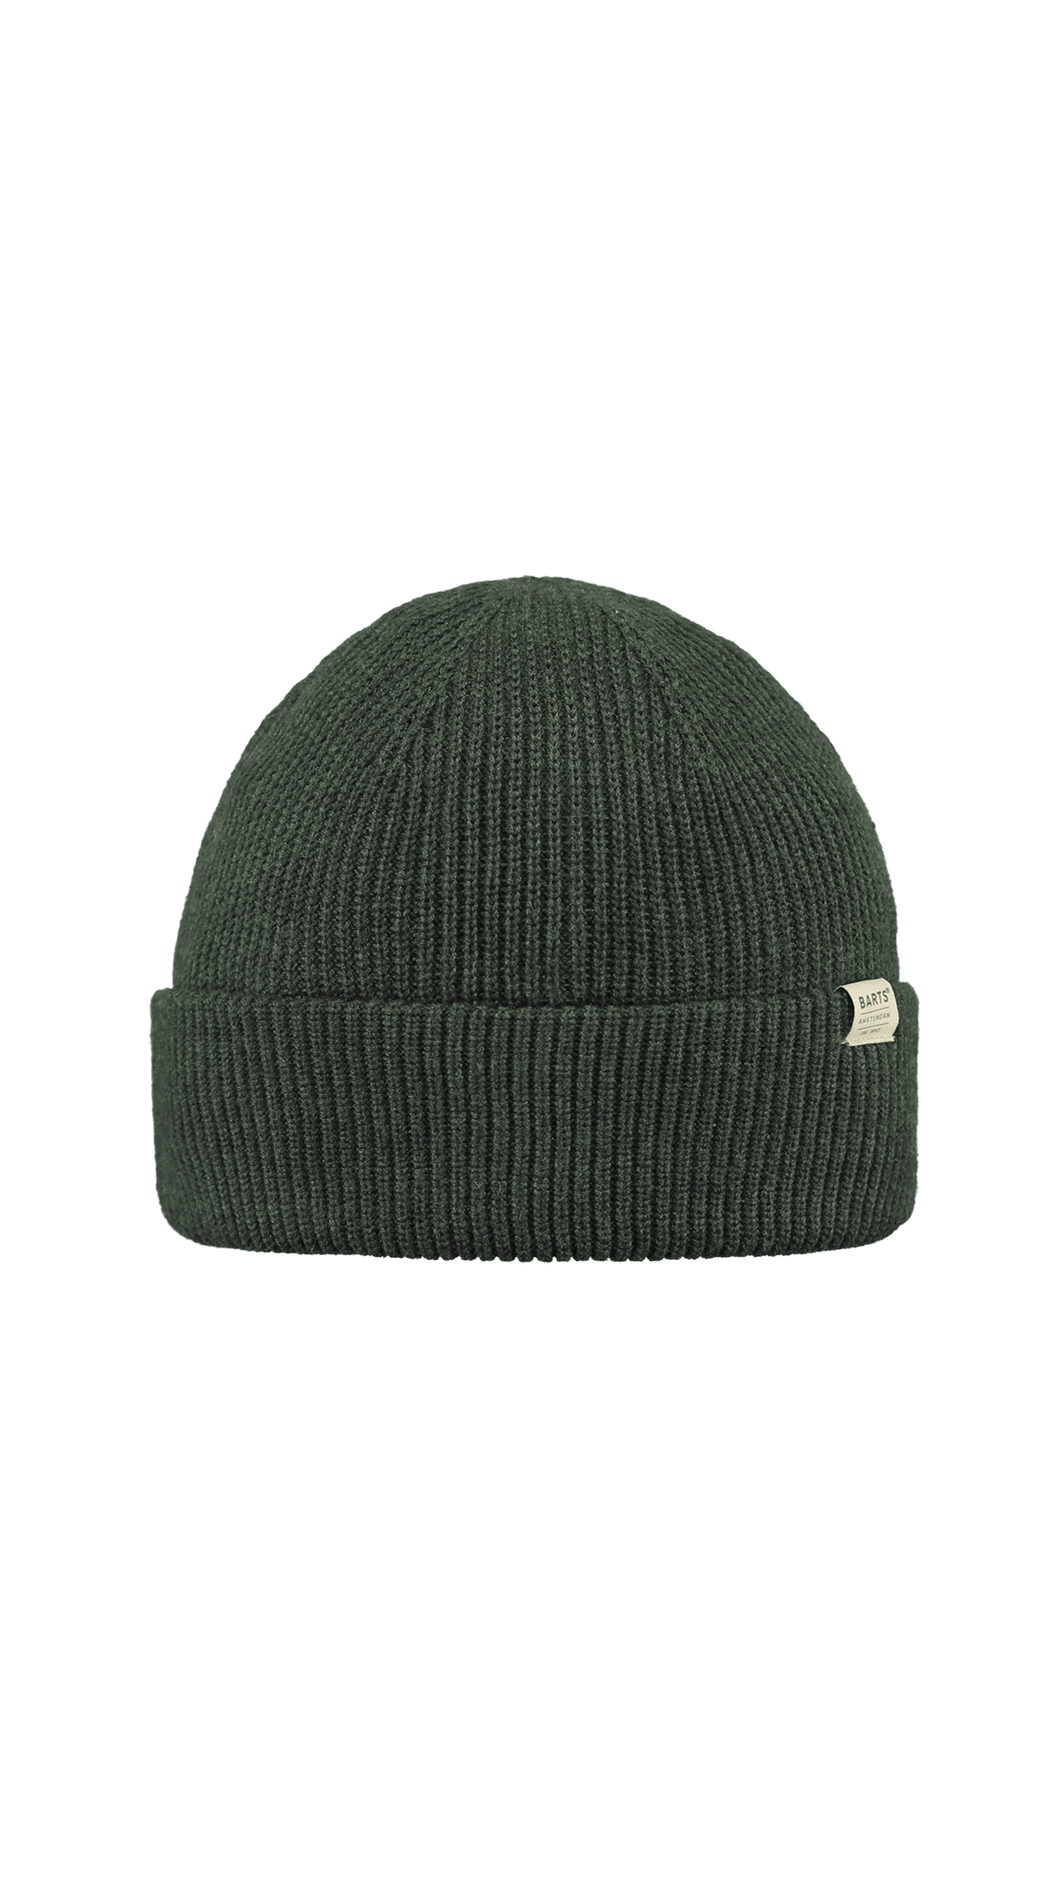 BARTS MENS STONEL BEANIE - ARMY GREEN